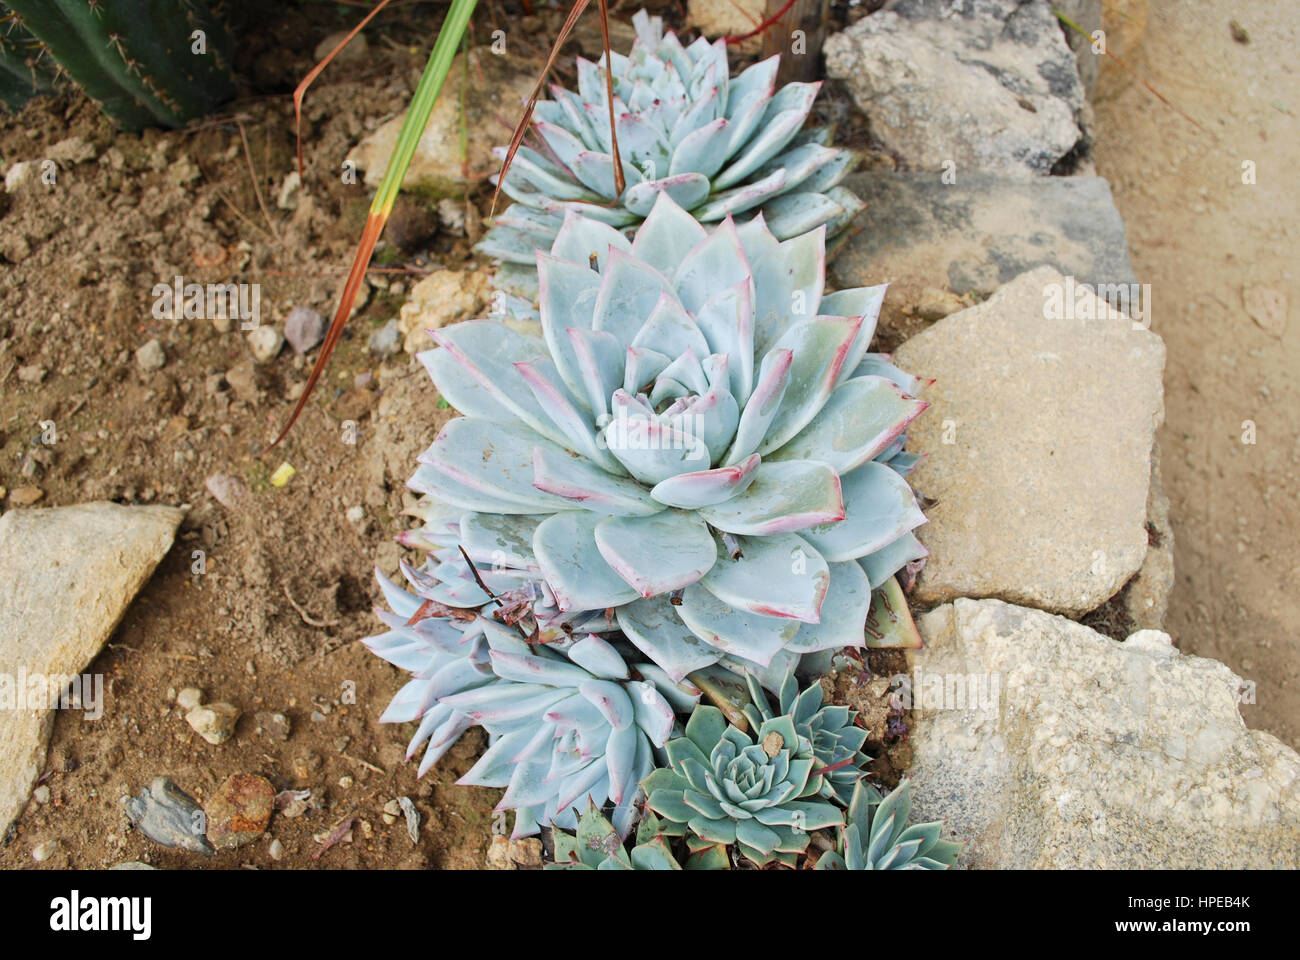 Dudleya caespitosa is a decorative succulent plant known by several common names, including Sealettuce, Sand lettuce, and Coast dudleya. Stock Photo